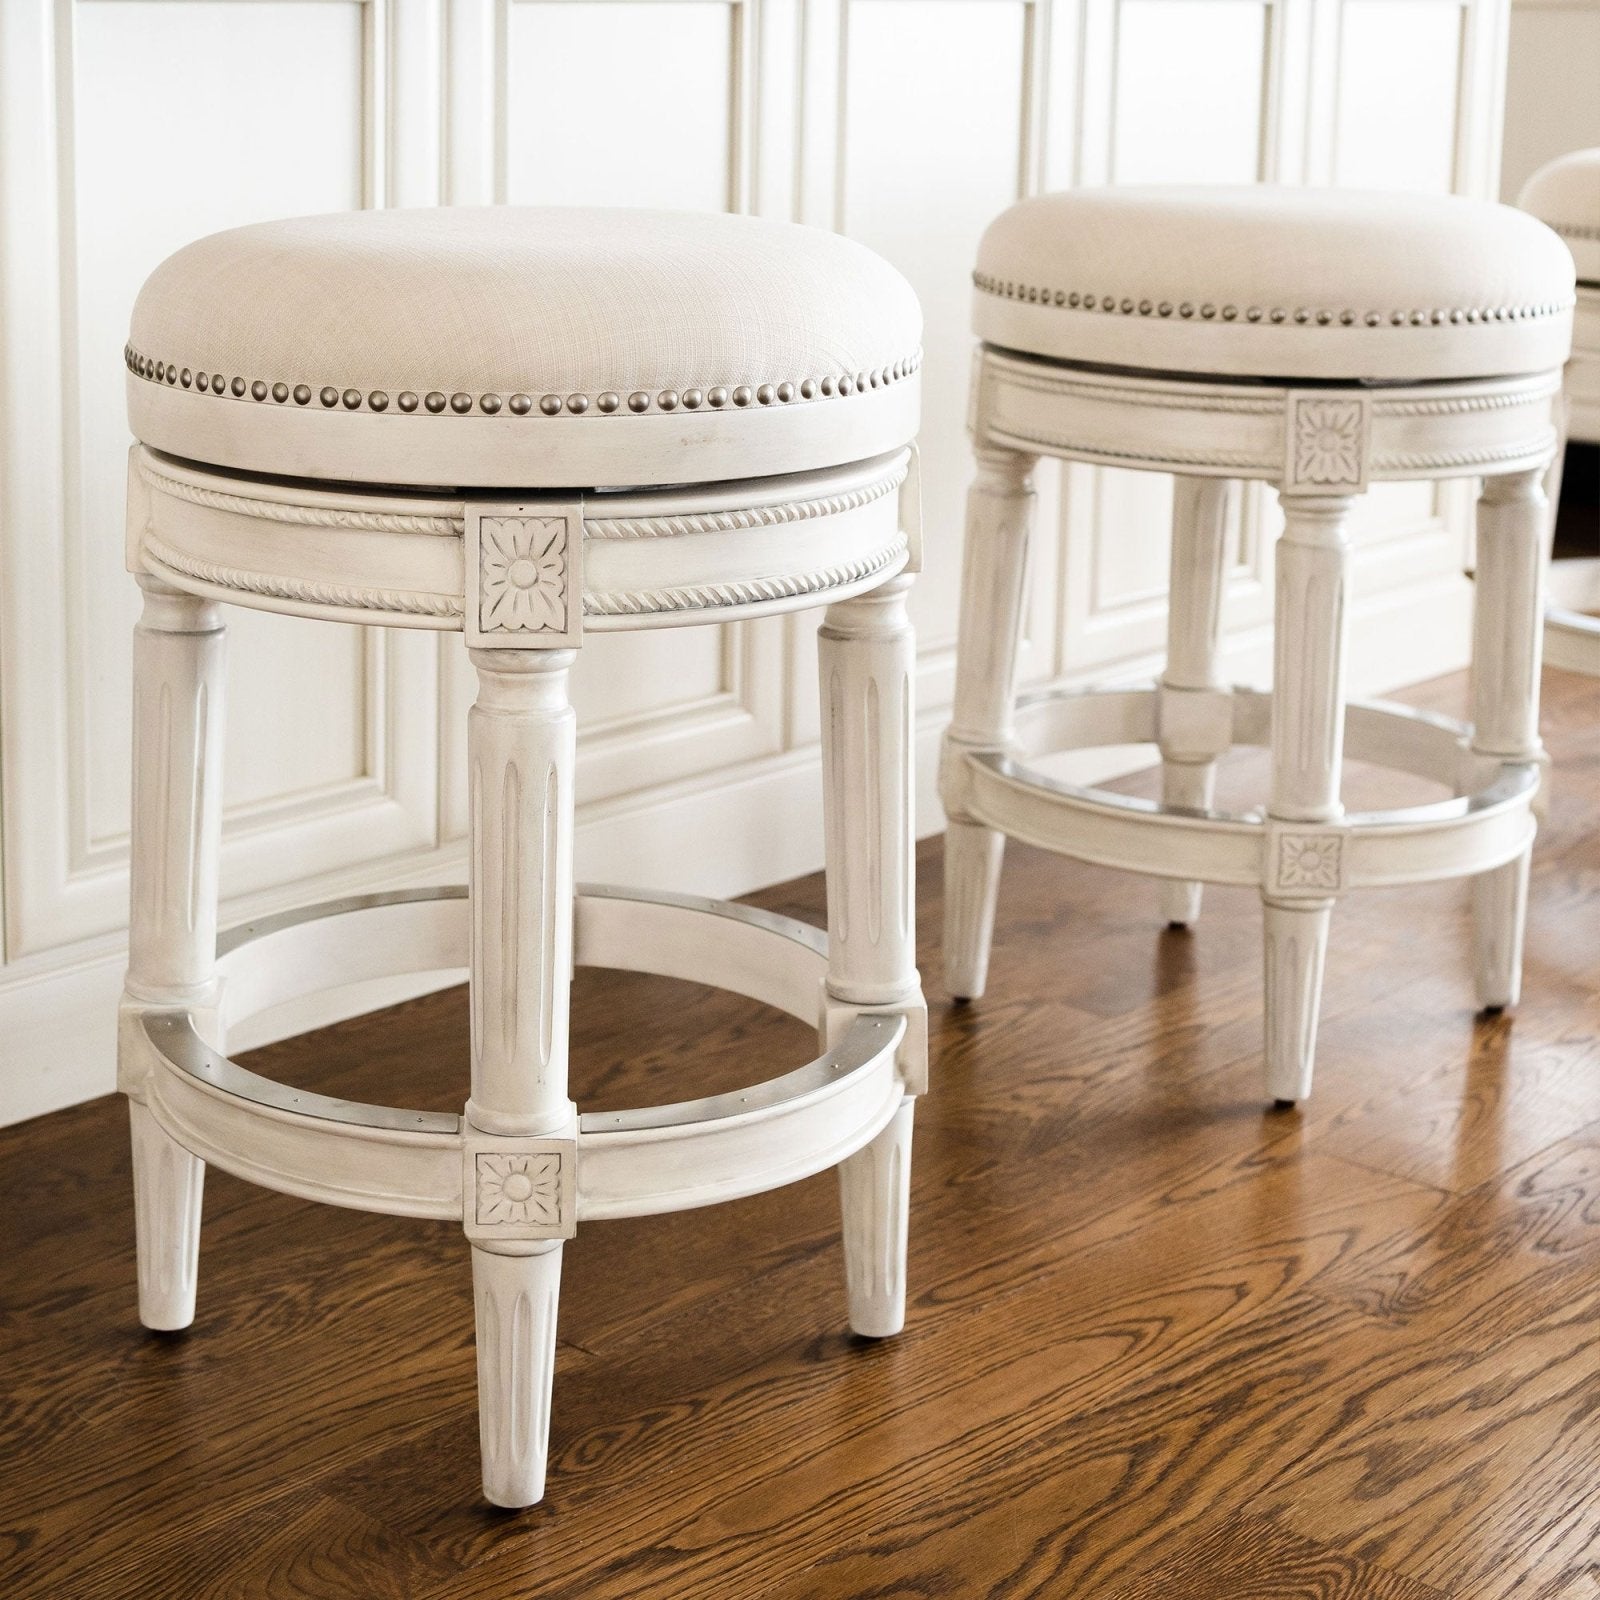 Pullman Backless Counter Stool in White Oak Finish with Natural Fabric Upholstery in Stools by Maven Lane